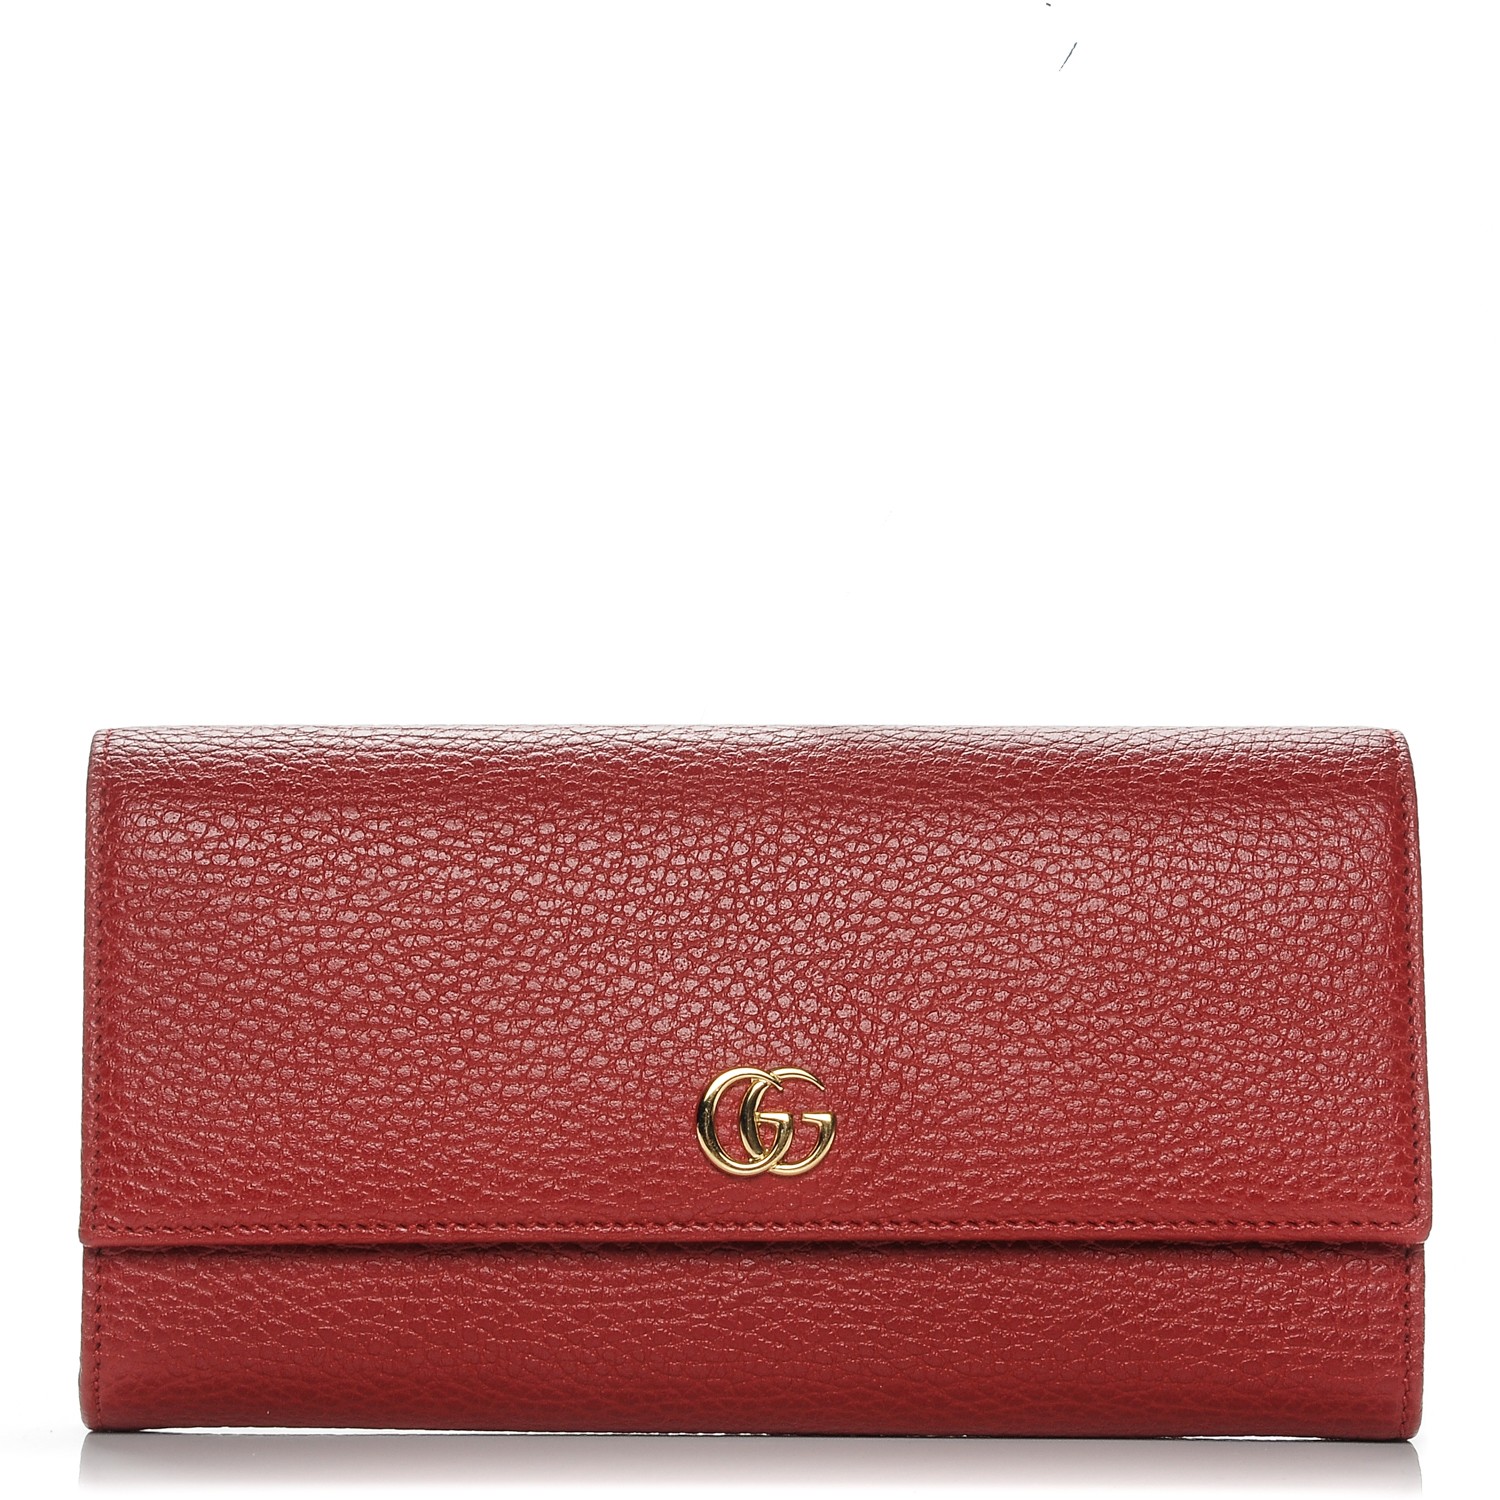 GUCCI Calfskin GG Marmont Continental Wallet Hibiscus Red 192525